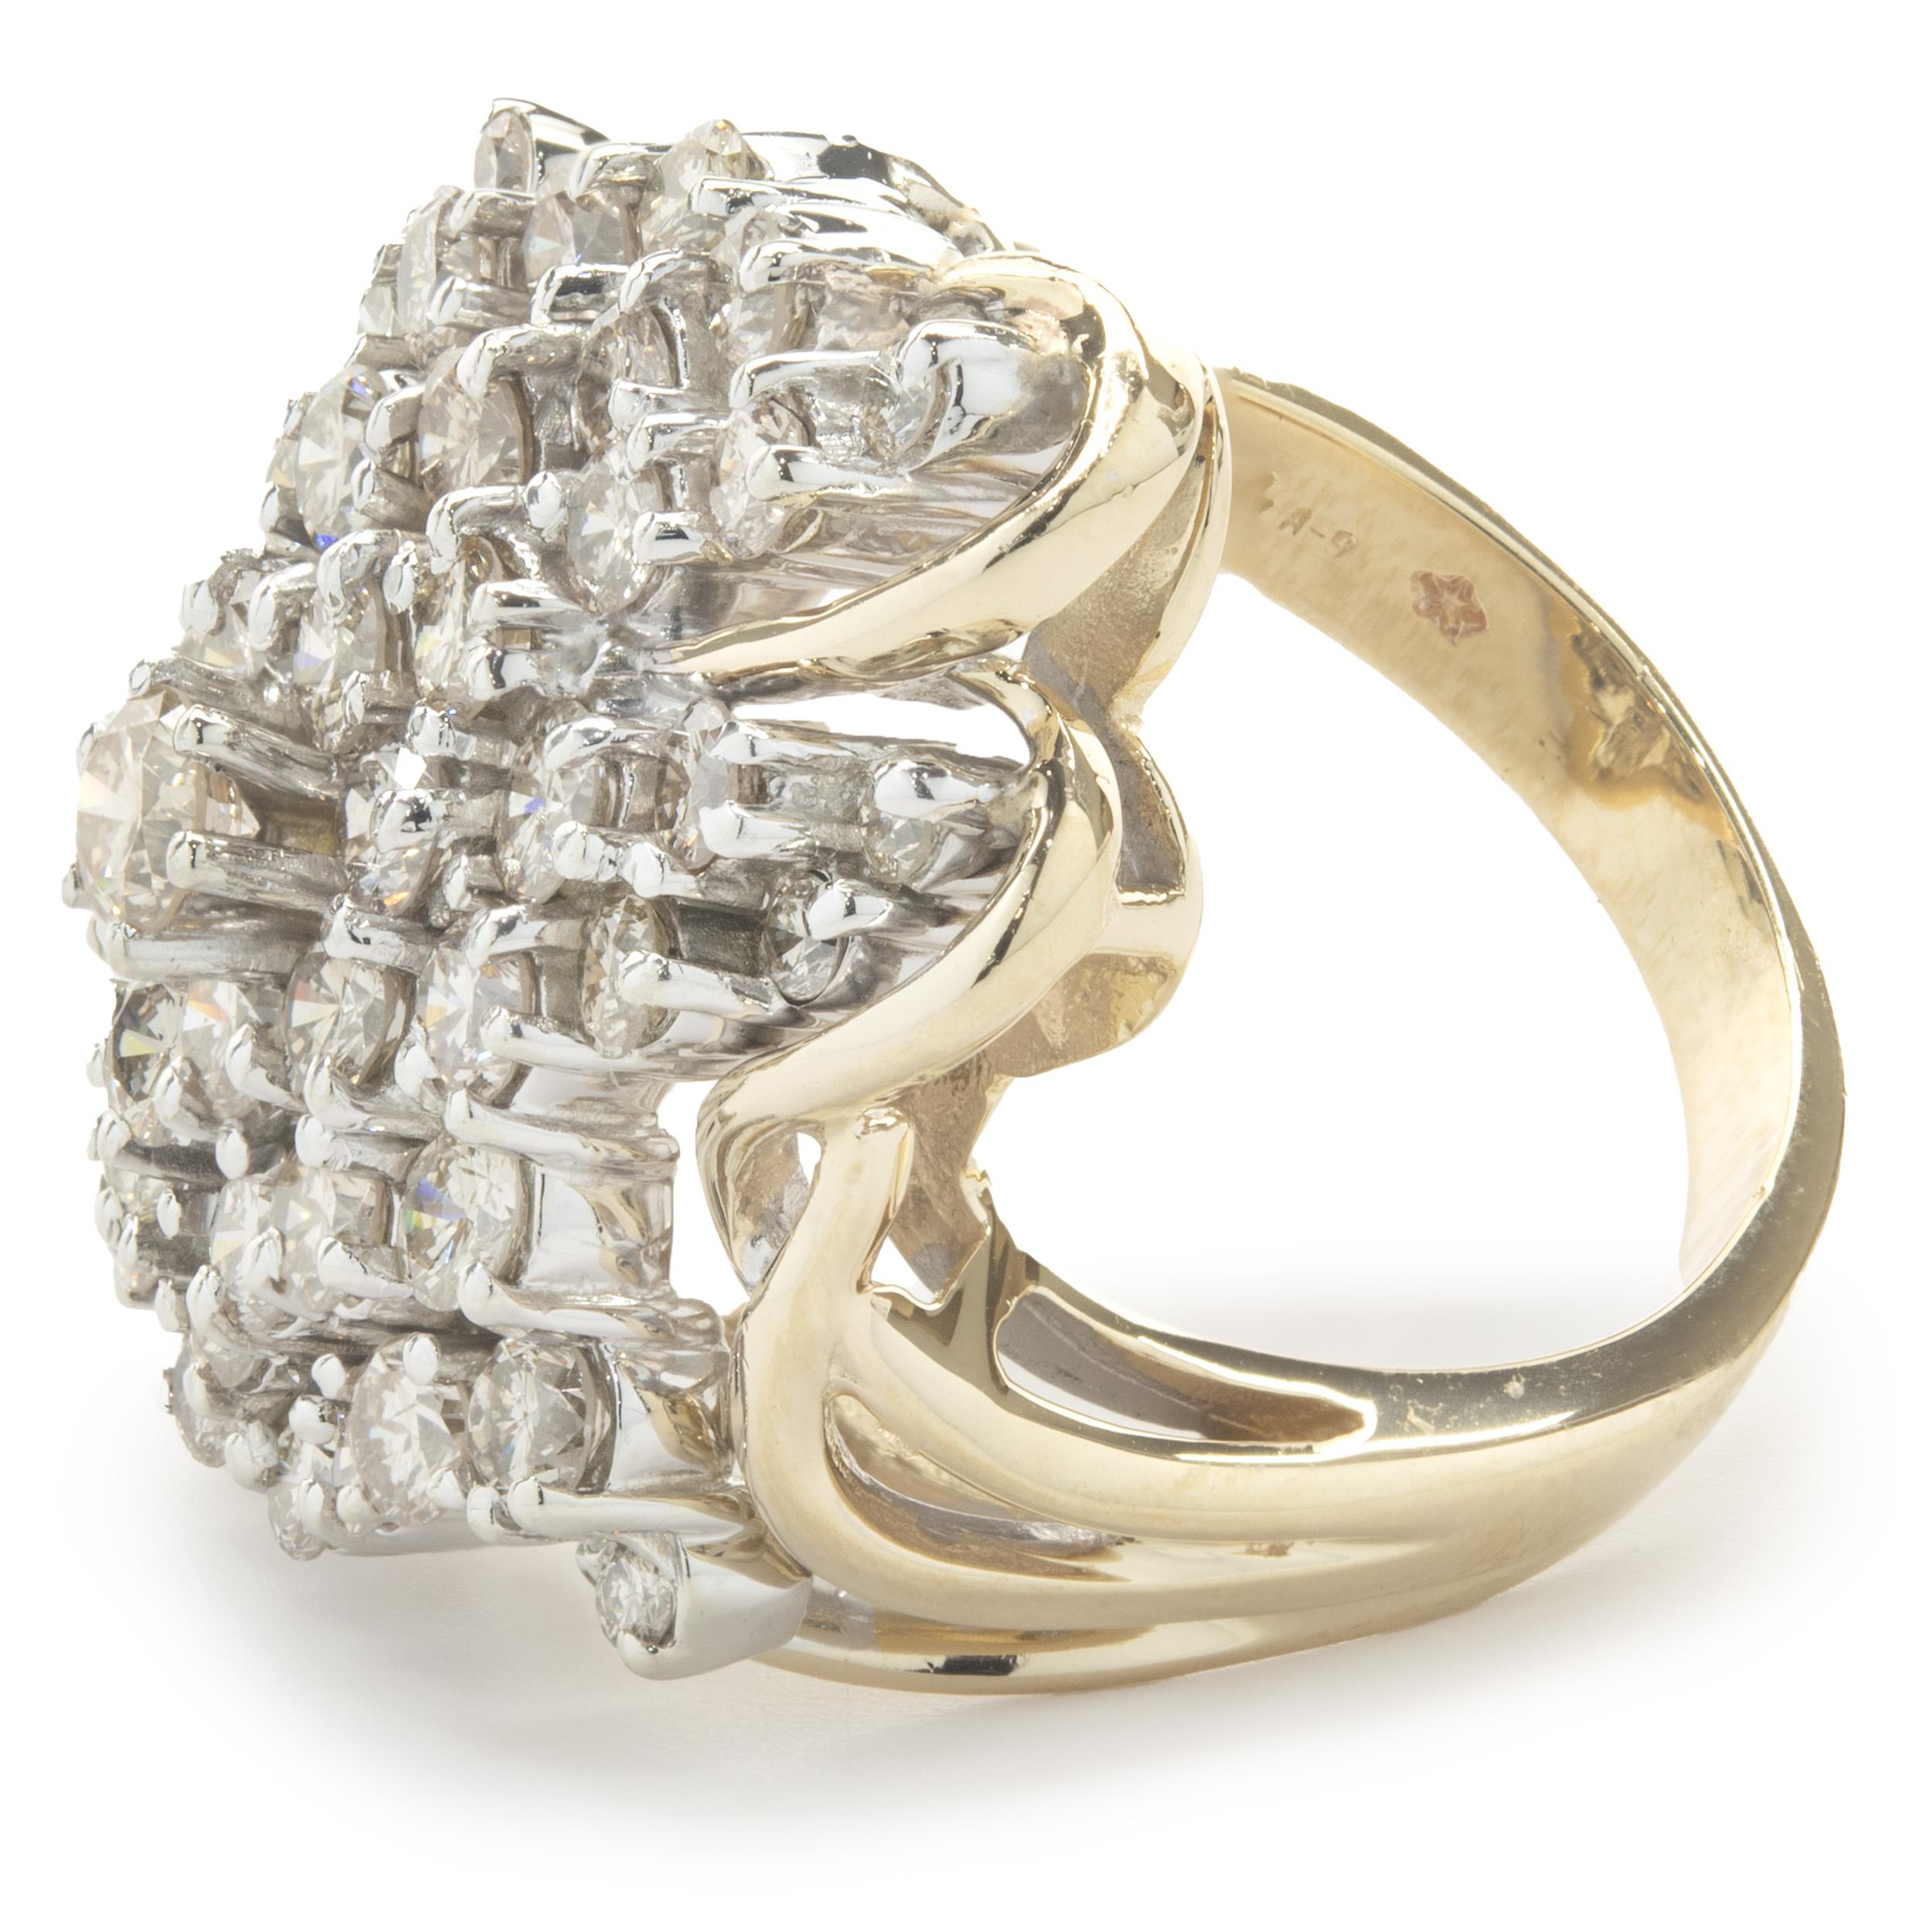 Designer: custom
Material: 14K yellow gold
Diamond:  round brilliant  cut = 3.15cttw
Color: K /L
Clarity: SI1
Ring size: 7 (please allow two additional shipping days for sizing requests)
Dimensions: Ring width measures 30.25mm 
Weight: 14.23 grams  